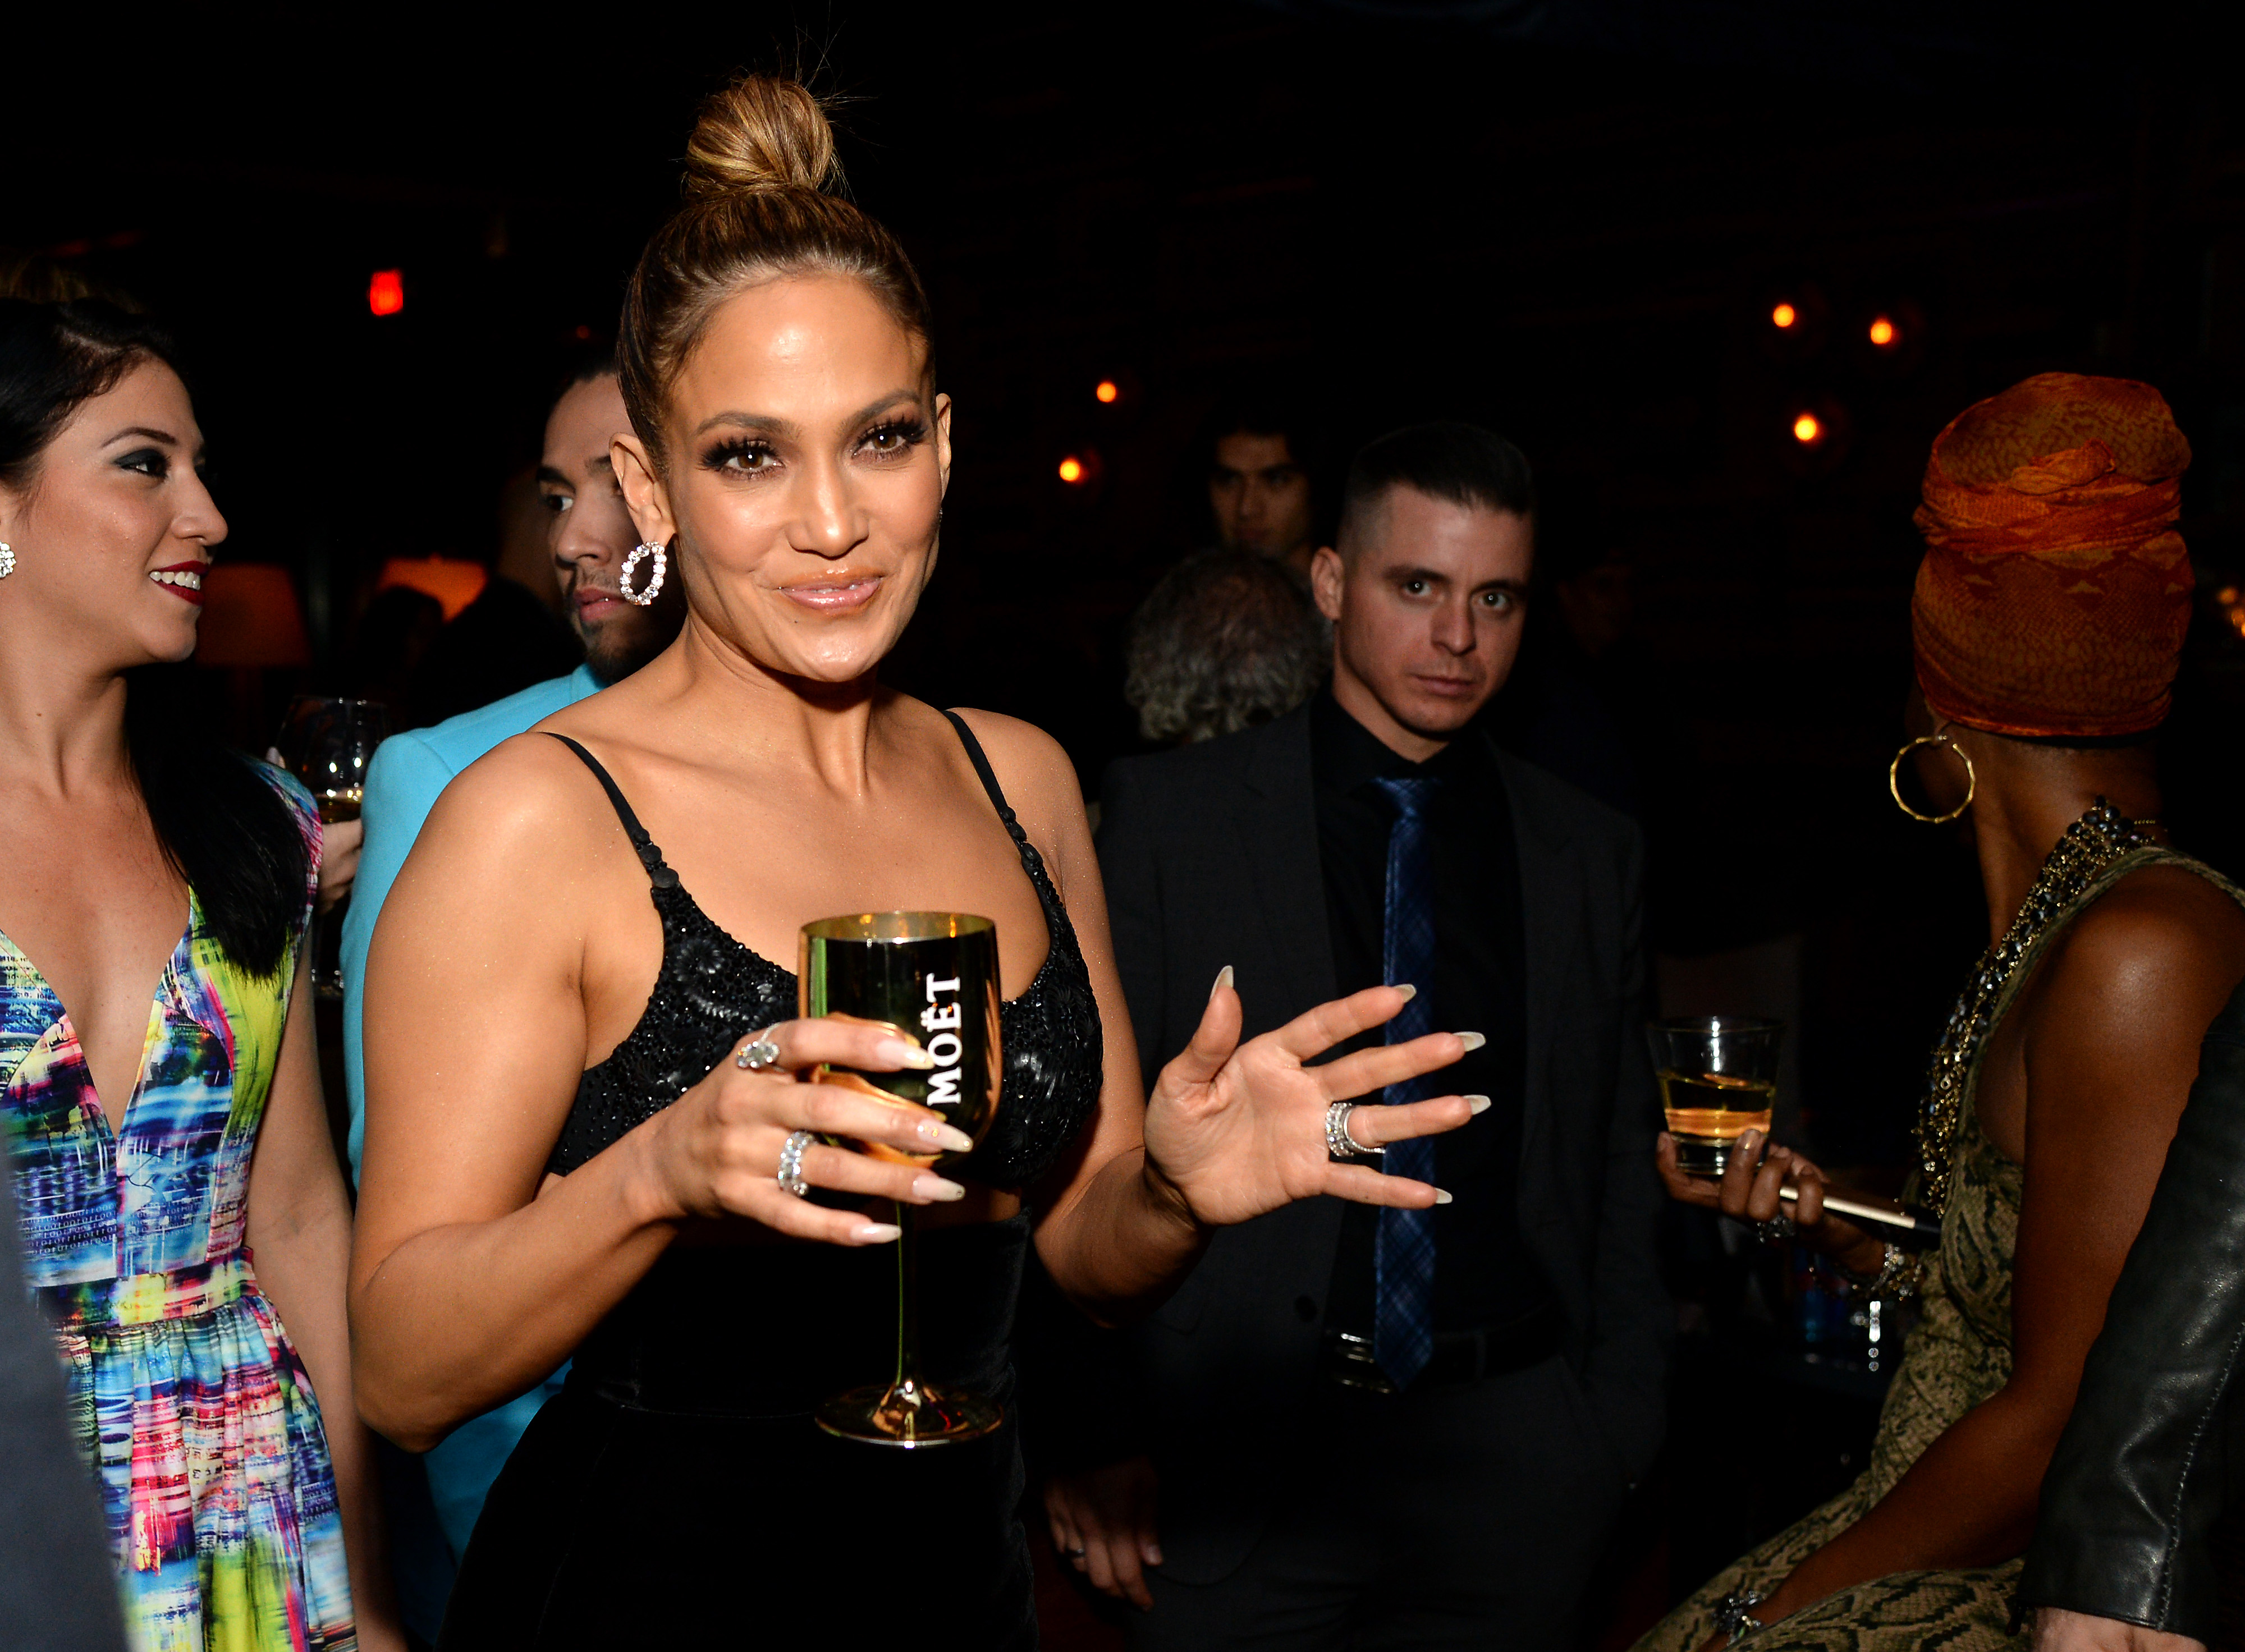 WEST HOLLYWOOD, CA - NOVEMBER 22: Jennifer Lopez attends the Moet & Chandon AMA After Party with Jennifer Lopez at HYDE Sunset: Kitchen + Cocktails on November 22, 2015 in West Hollywood, California. (Photo by Michael Kovac/Getty Images for Moet & Chandon)